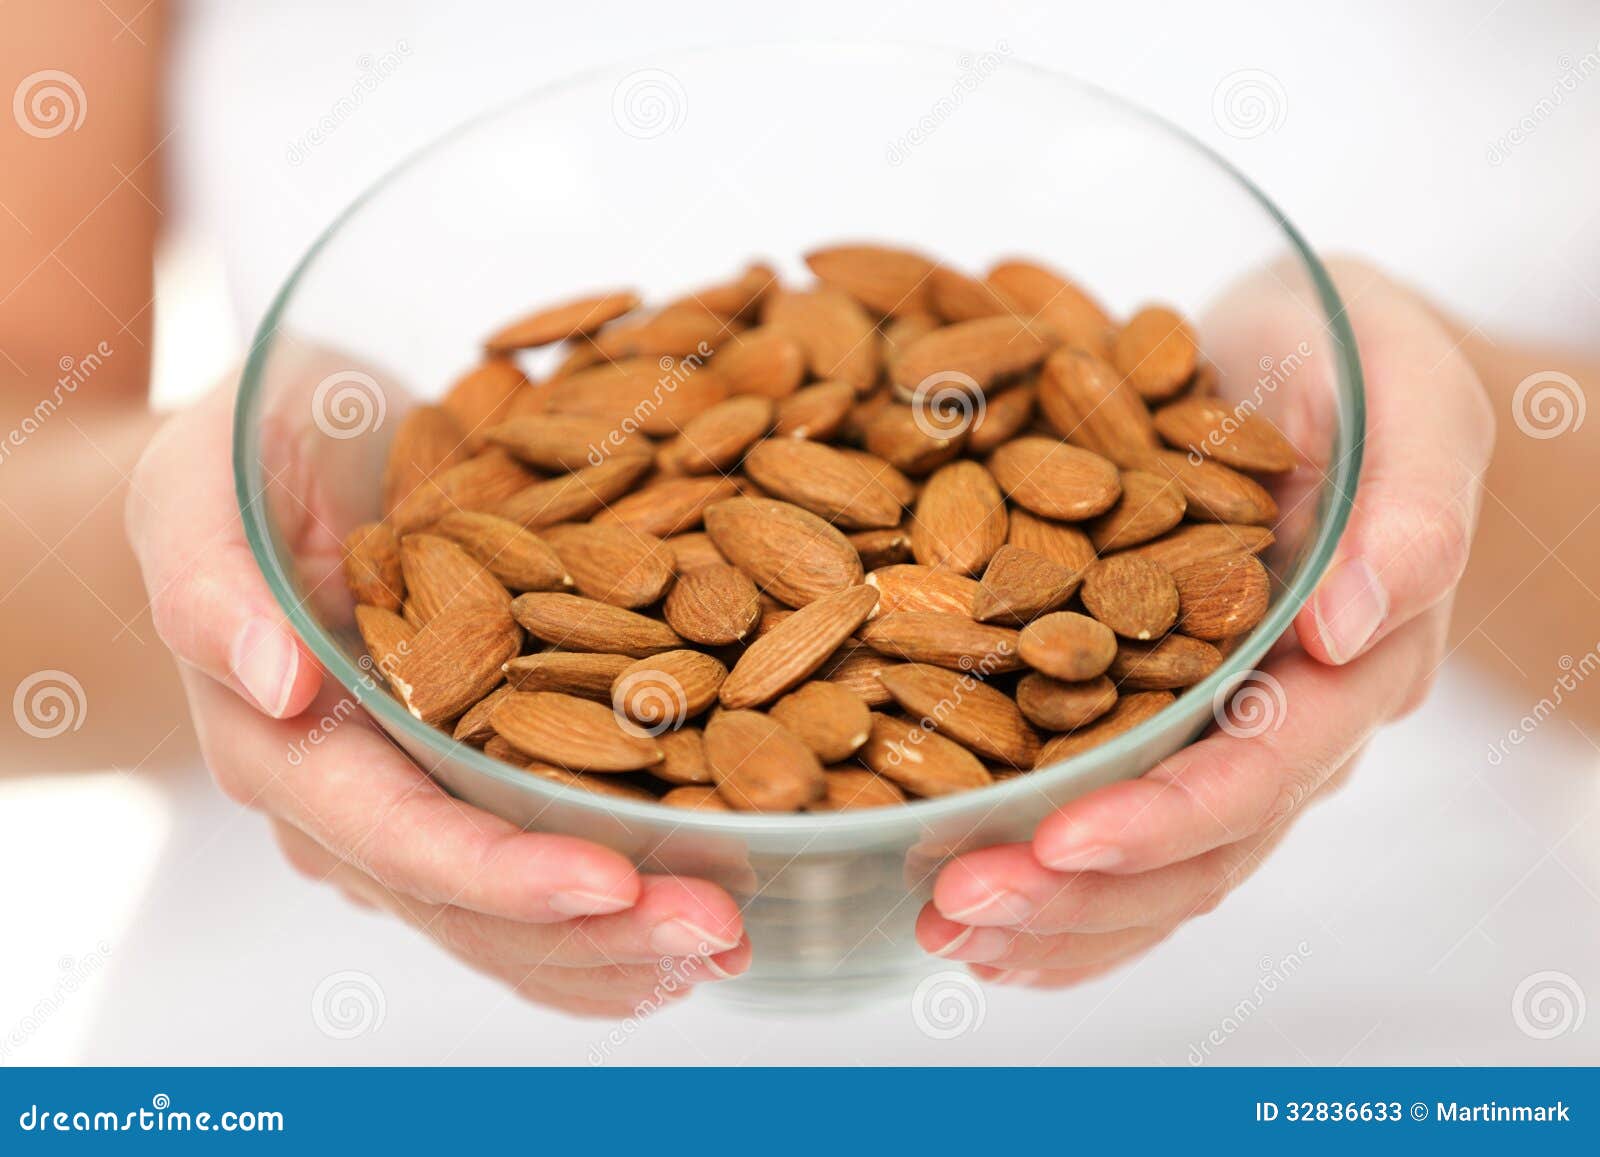 almonds-woman-showing-raw-almond-bowl-close-up-nuts-healthy-food-concept-studio-hands-lifting-unprocessed-32836633.jpg